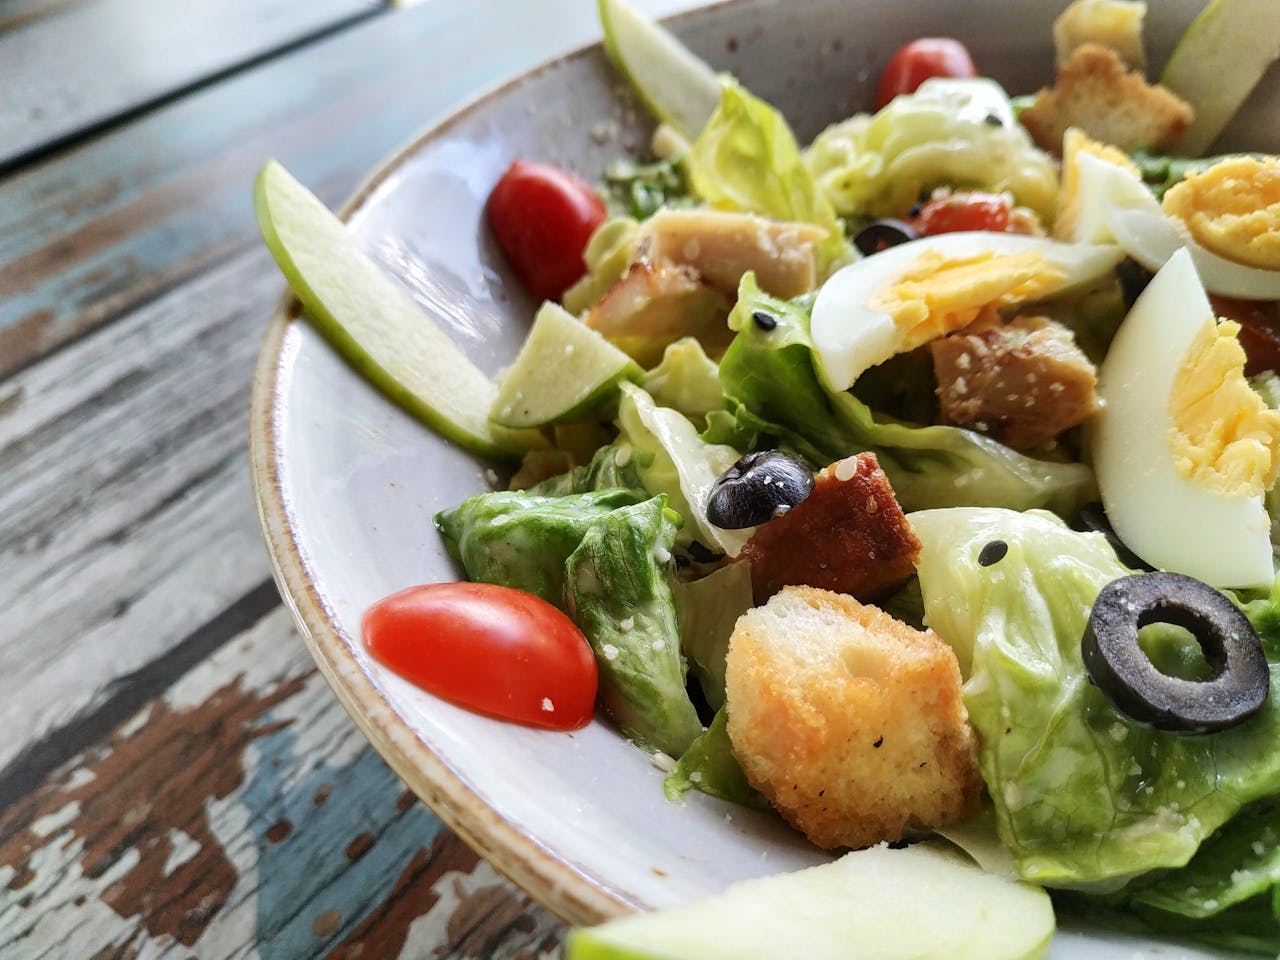 What salad dressings are good for kidney disease